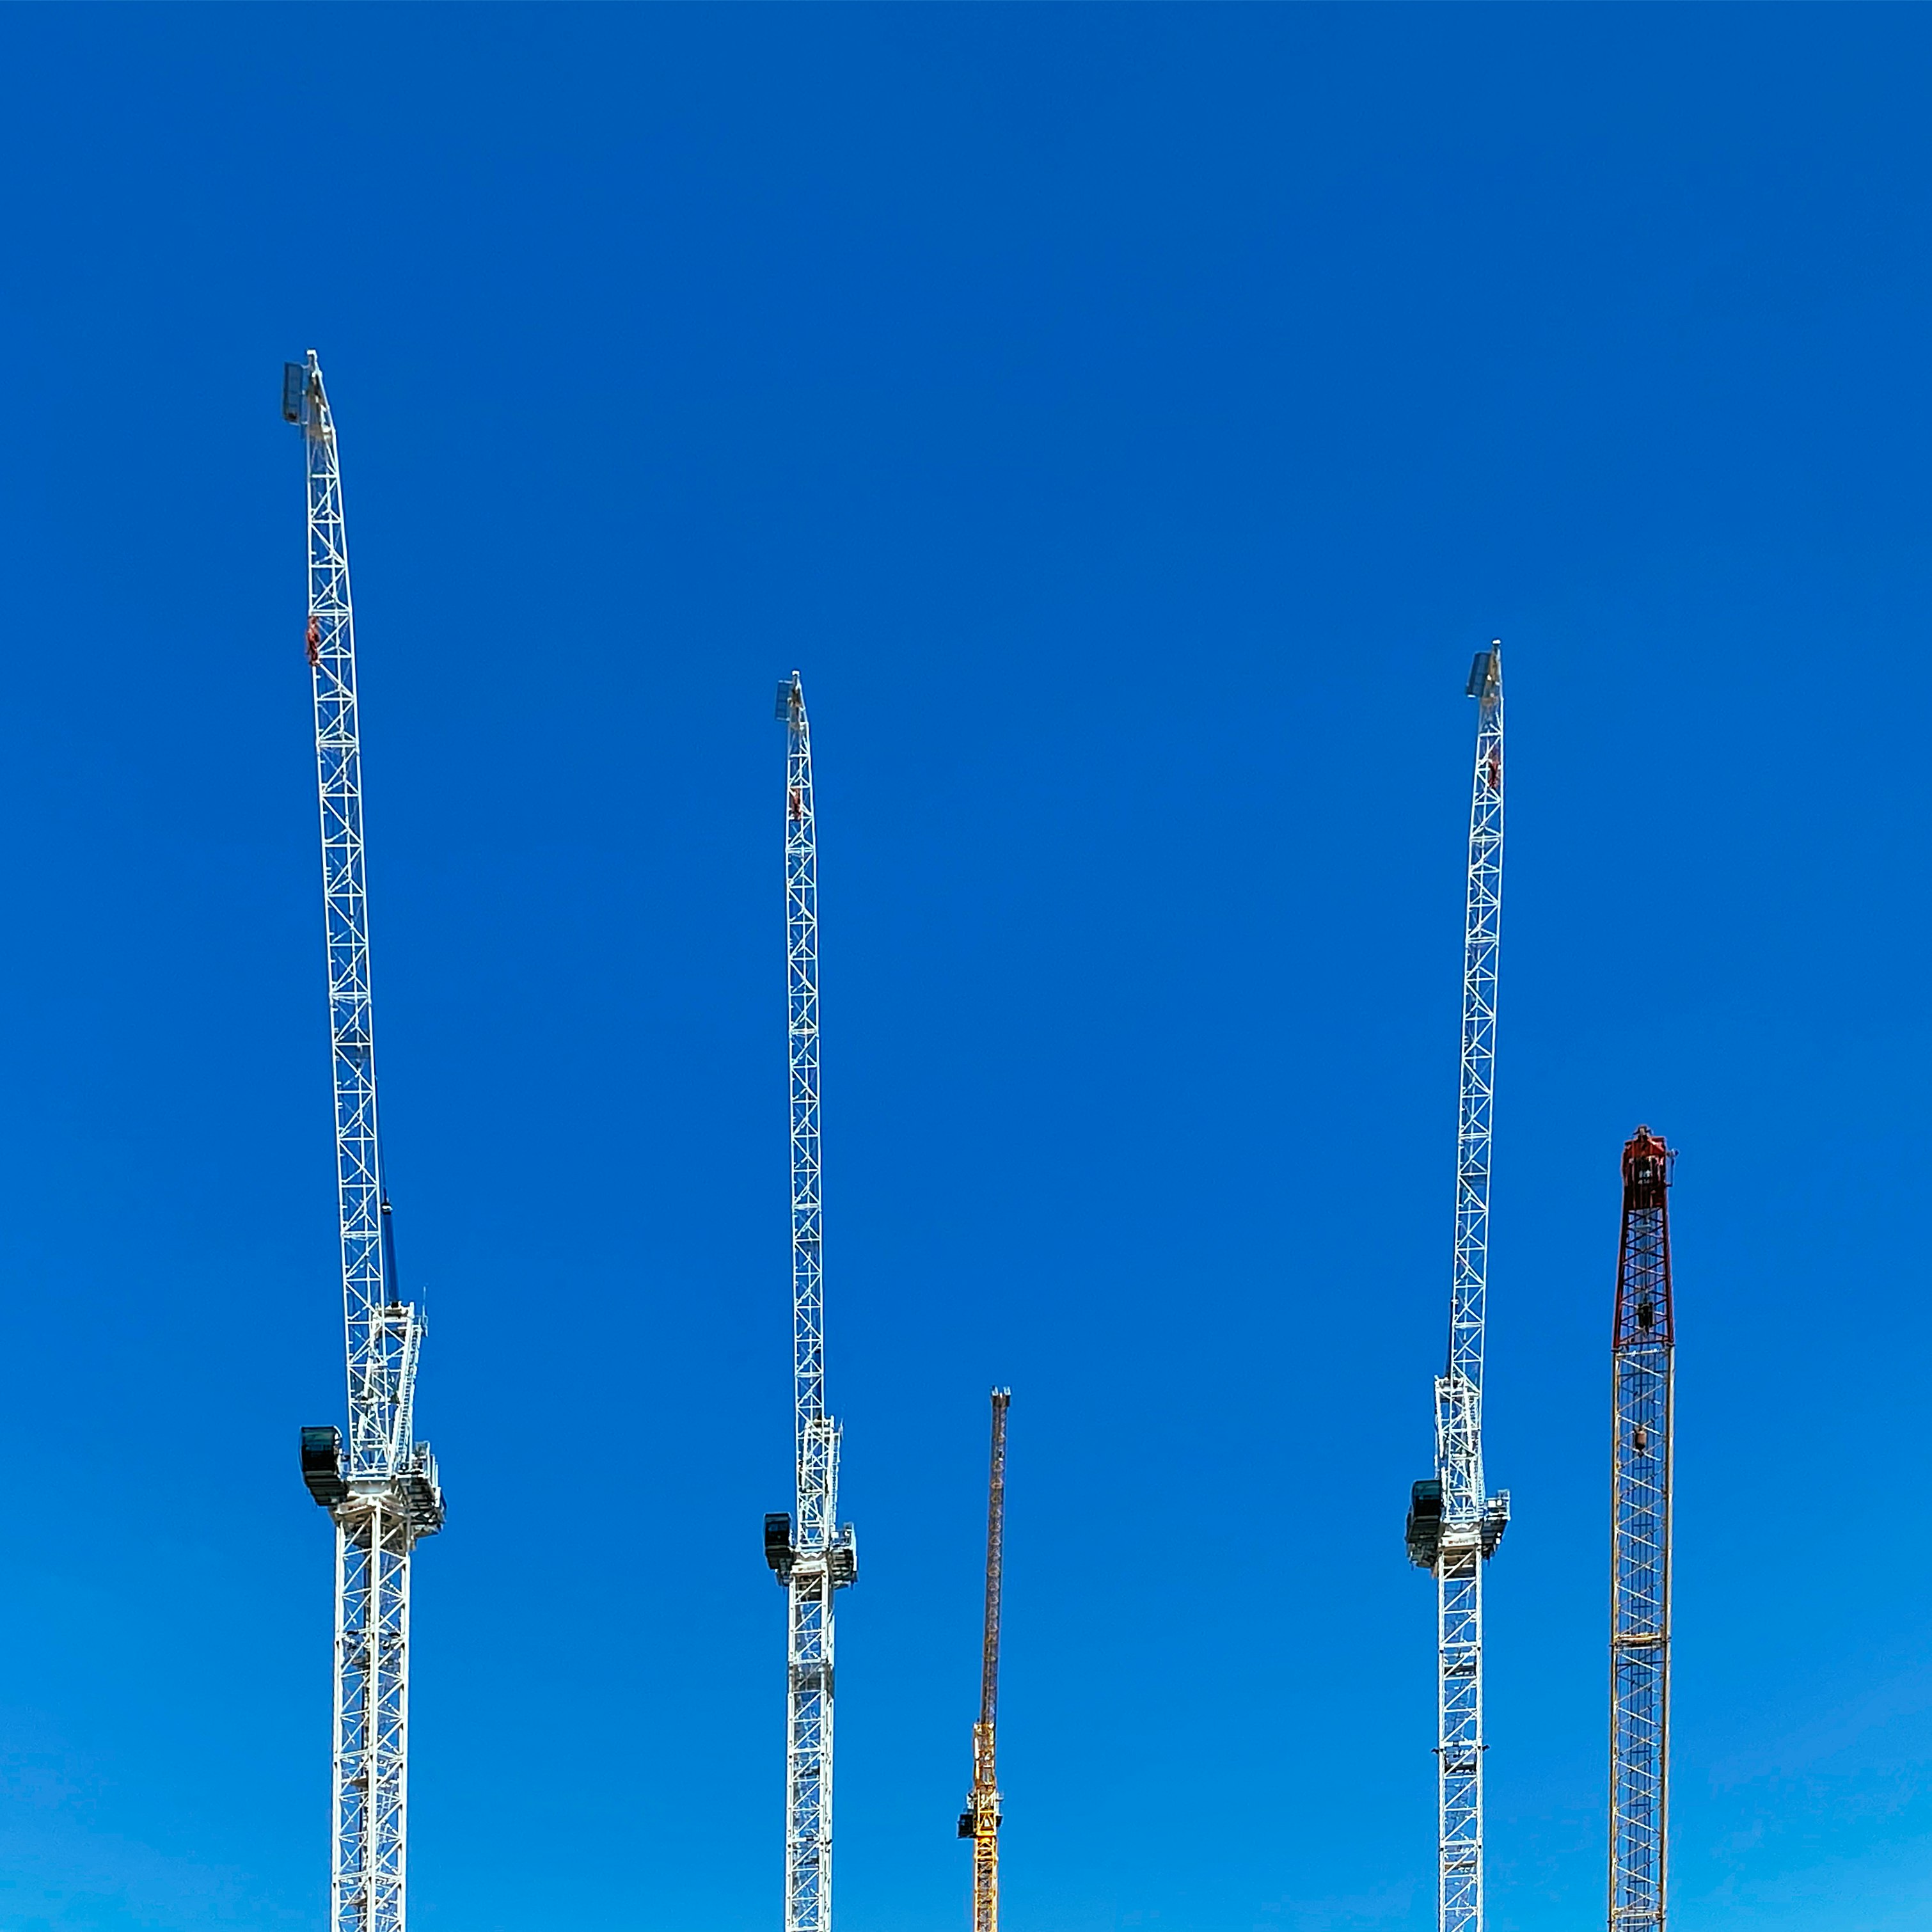 white metal towers under blue sky during daytime